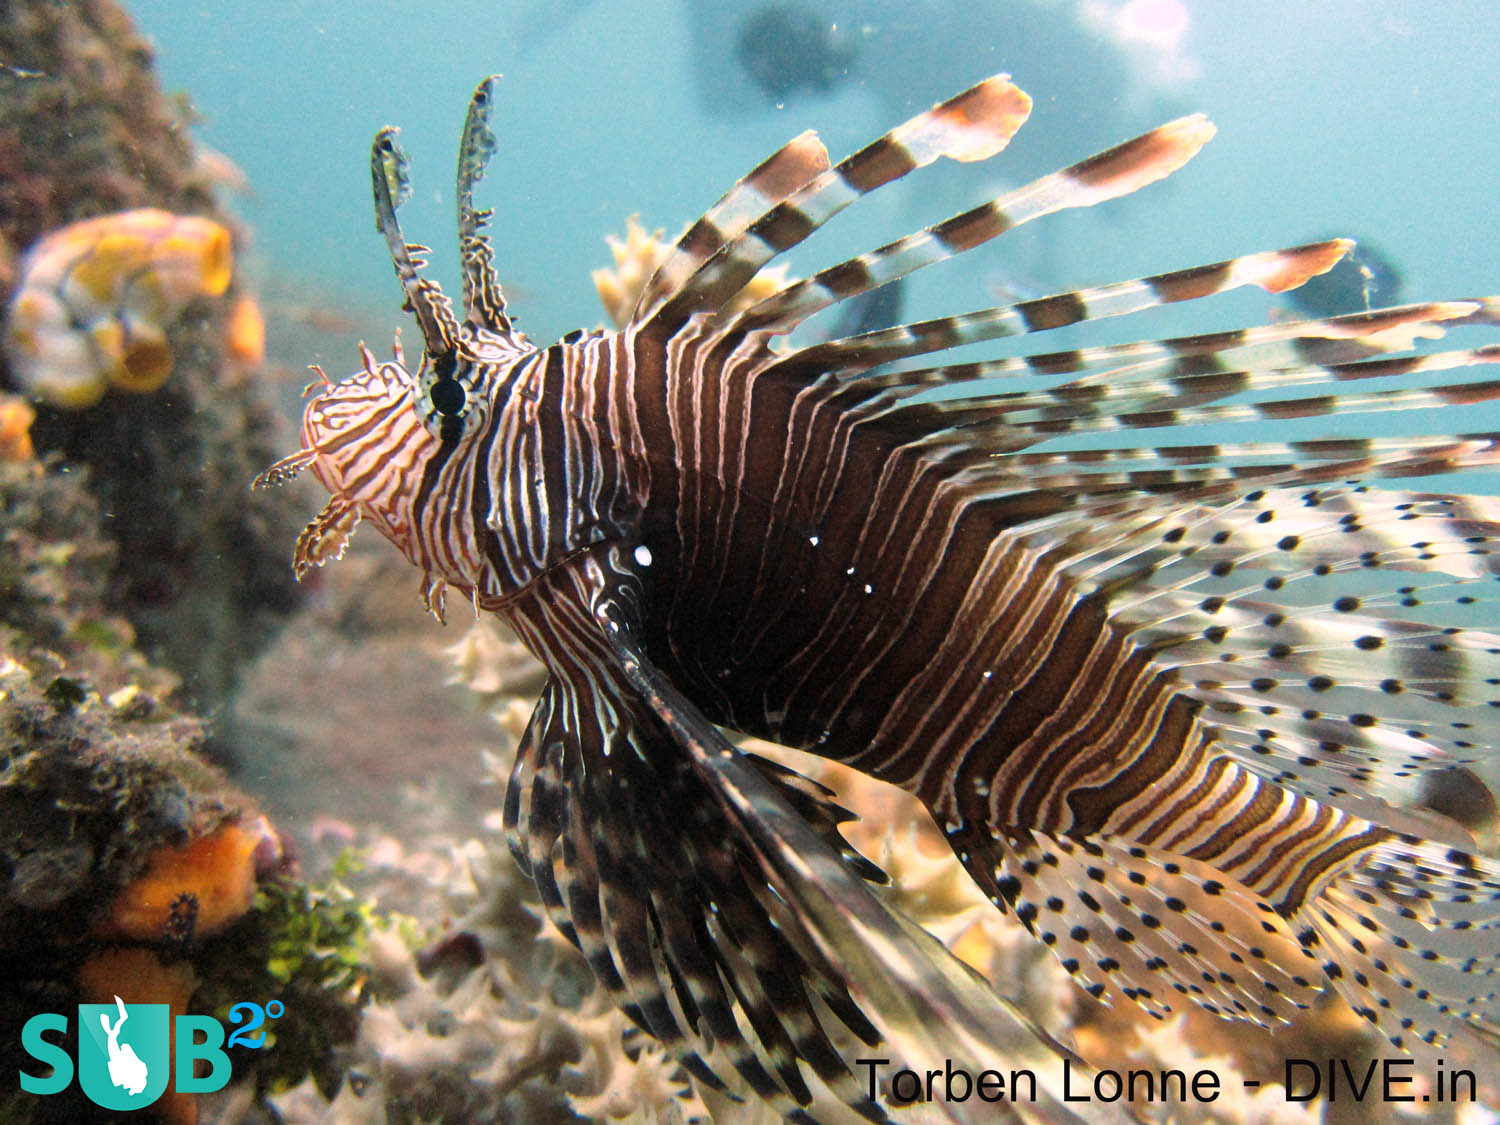 The lionfish has a stunning camouflage that it uses to effectively stalk its prey. Its outstretched and elongated pectoral fins are used to corner small fish, like Damsels, and to engulf them easily.